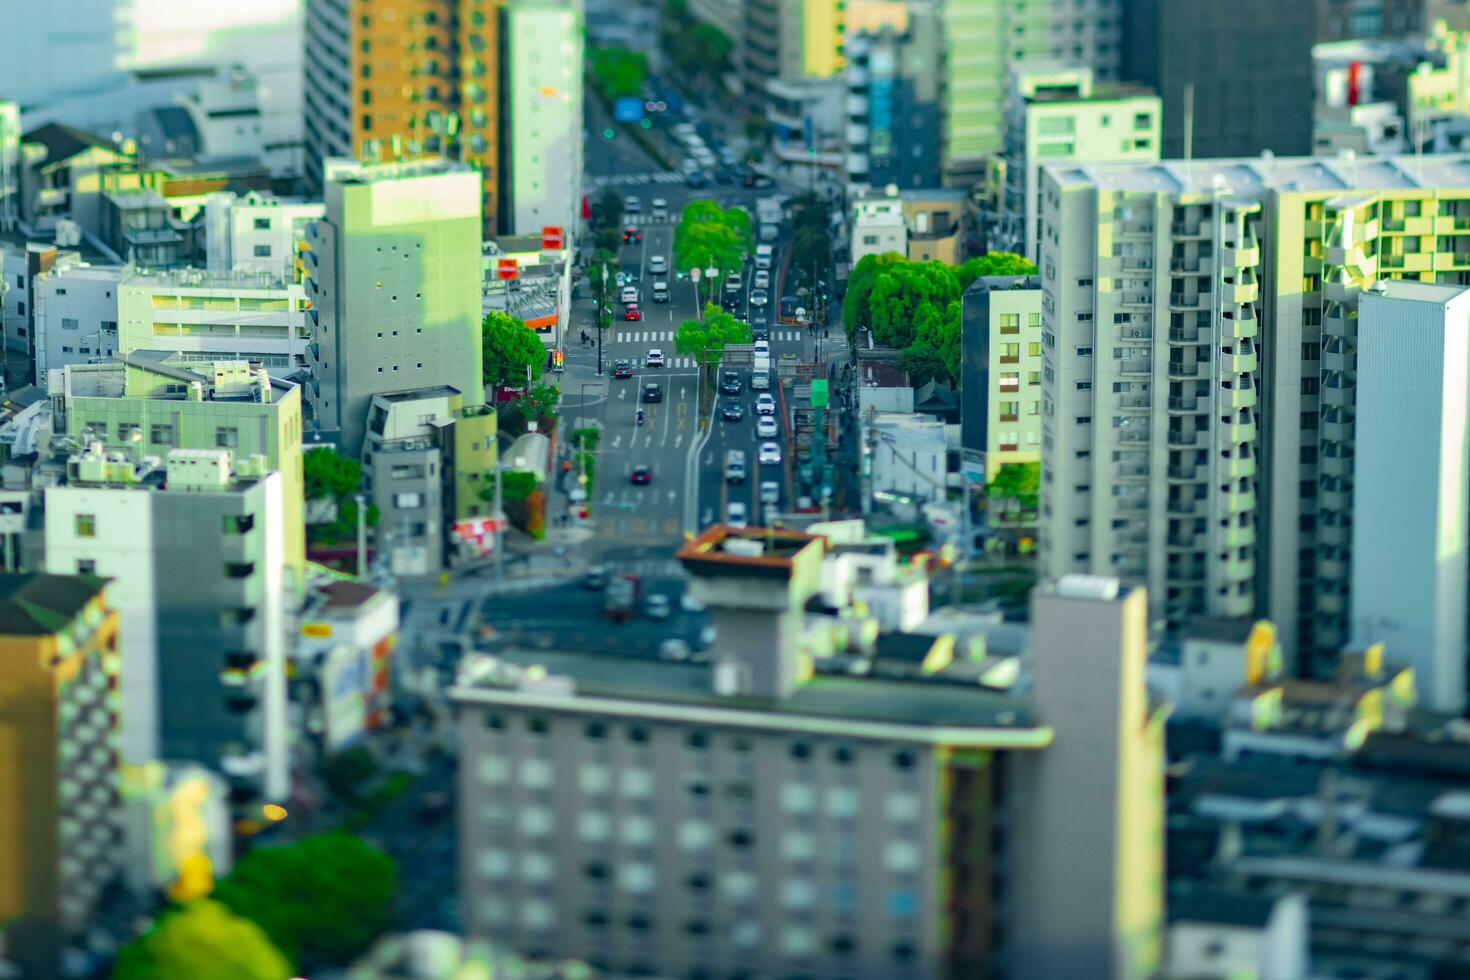 A dusk miniature cityscape by high angle view at the urban street in Osaka photo